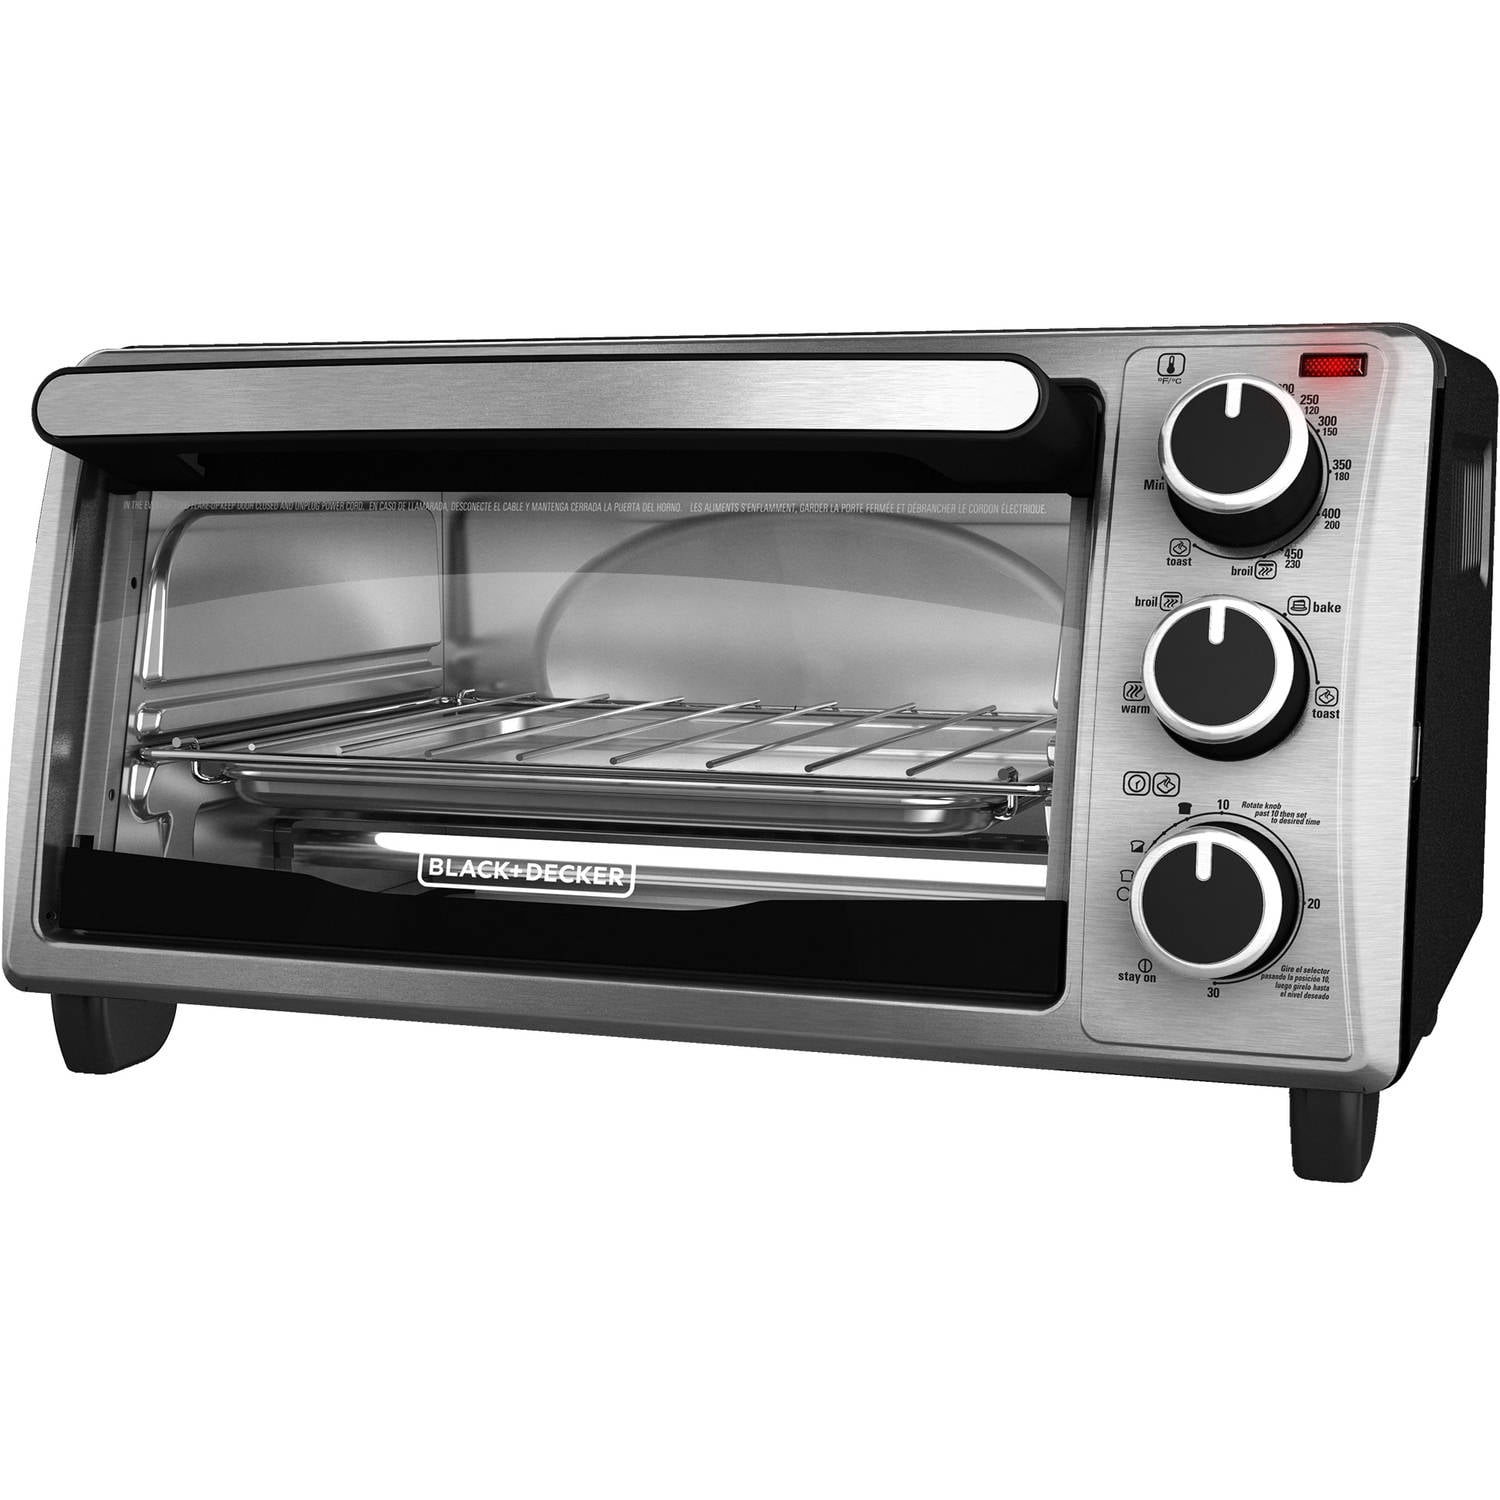 BLACK AND DECKER TO1455 Stainless steel Toaster Oven - Works Great + 1 pan